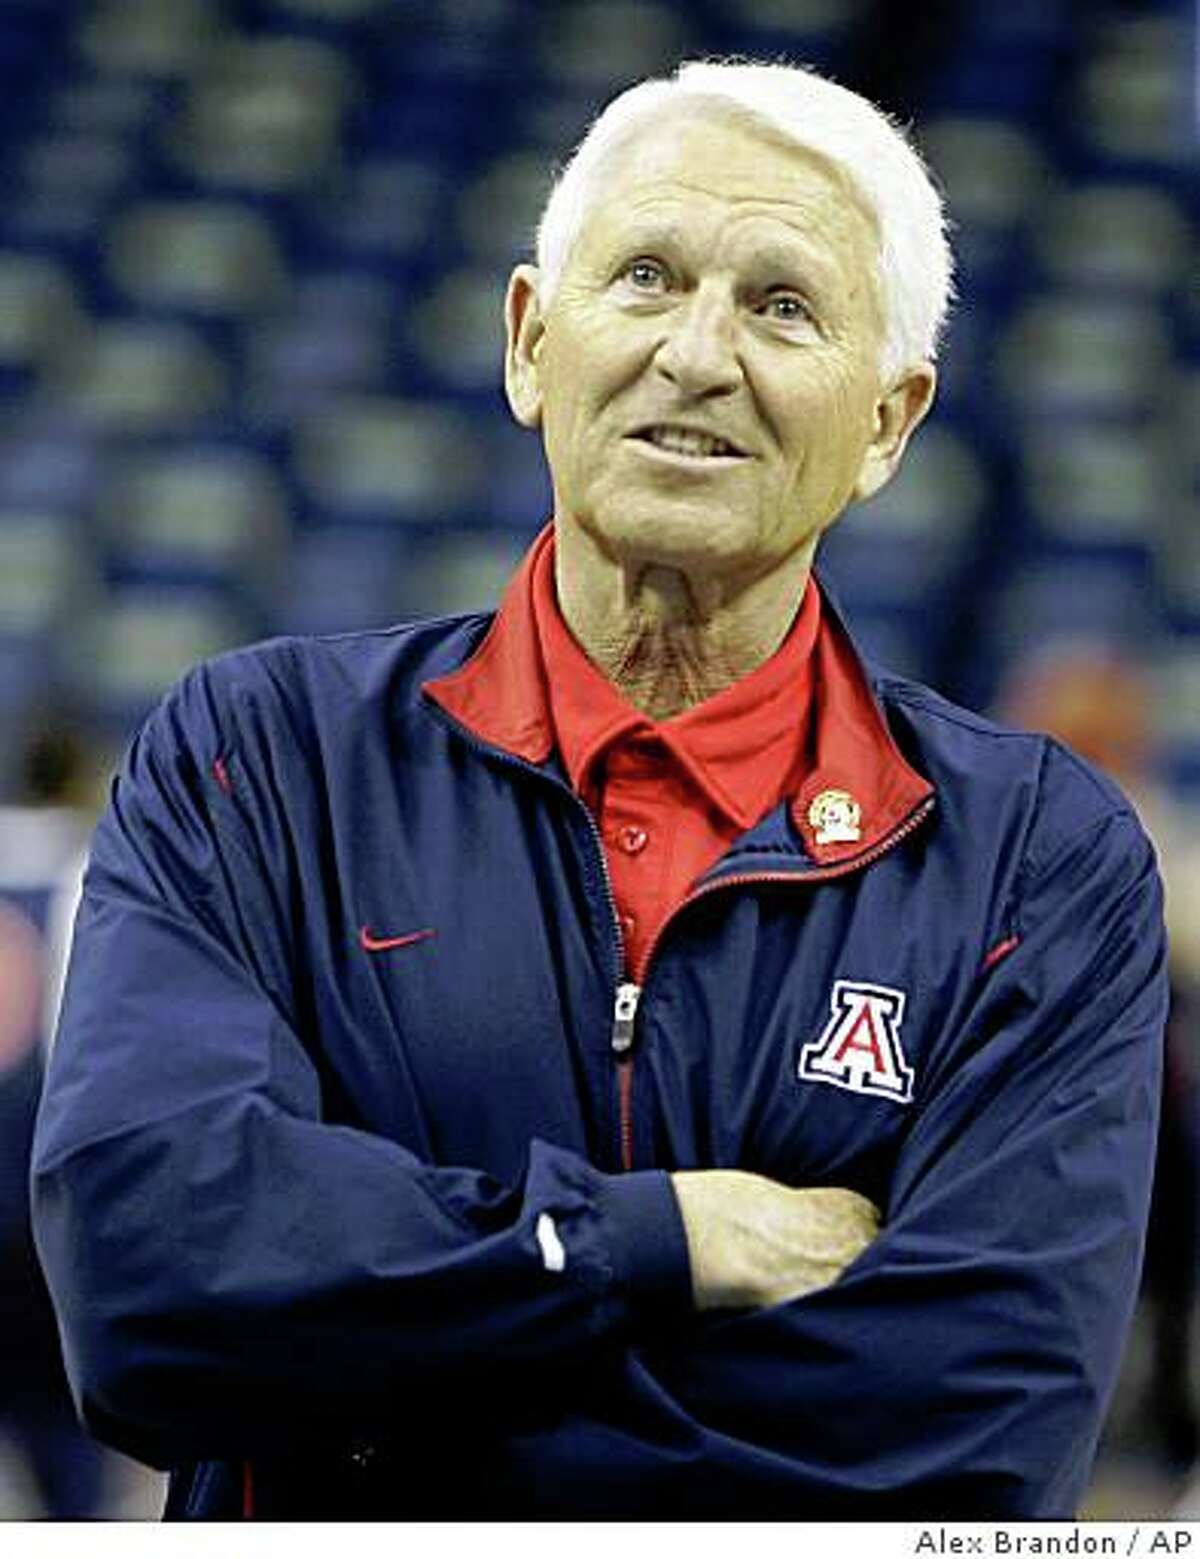 Lute Olson, the Hall of Fame coach who turned Arizona into a college basketball powerhouse, has died. He was 85.